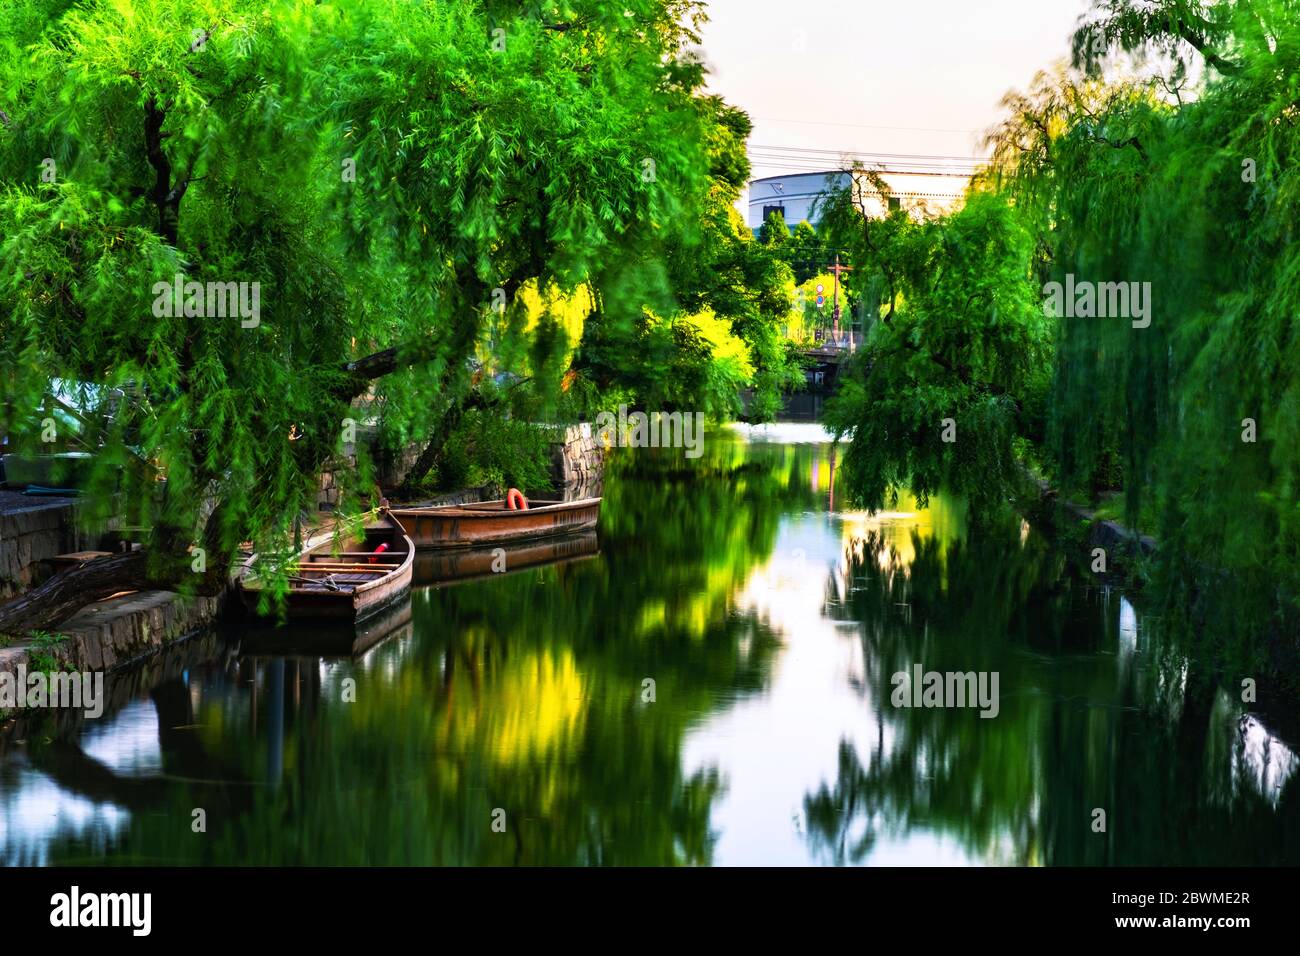 Kurashiki, Japan. View of famous canal in Kurashiki, Japan in the evening. Two old wooden boats moored, motion blurred river with green trees Stock Photo